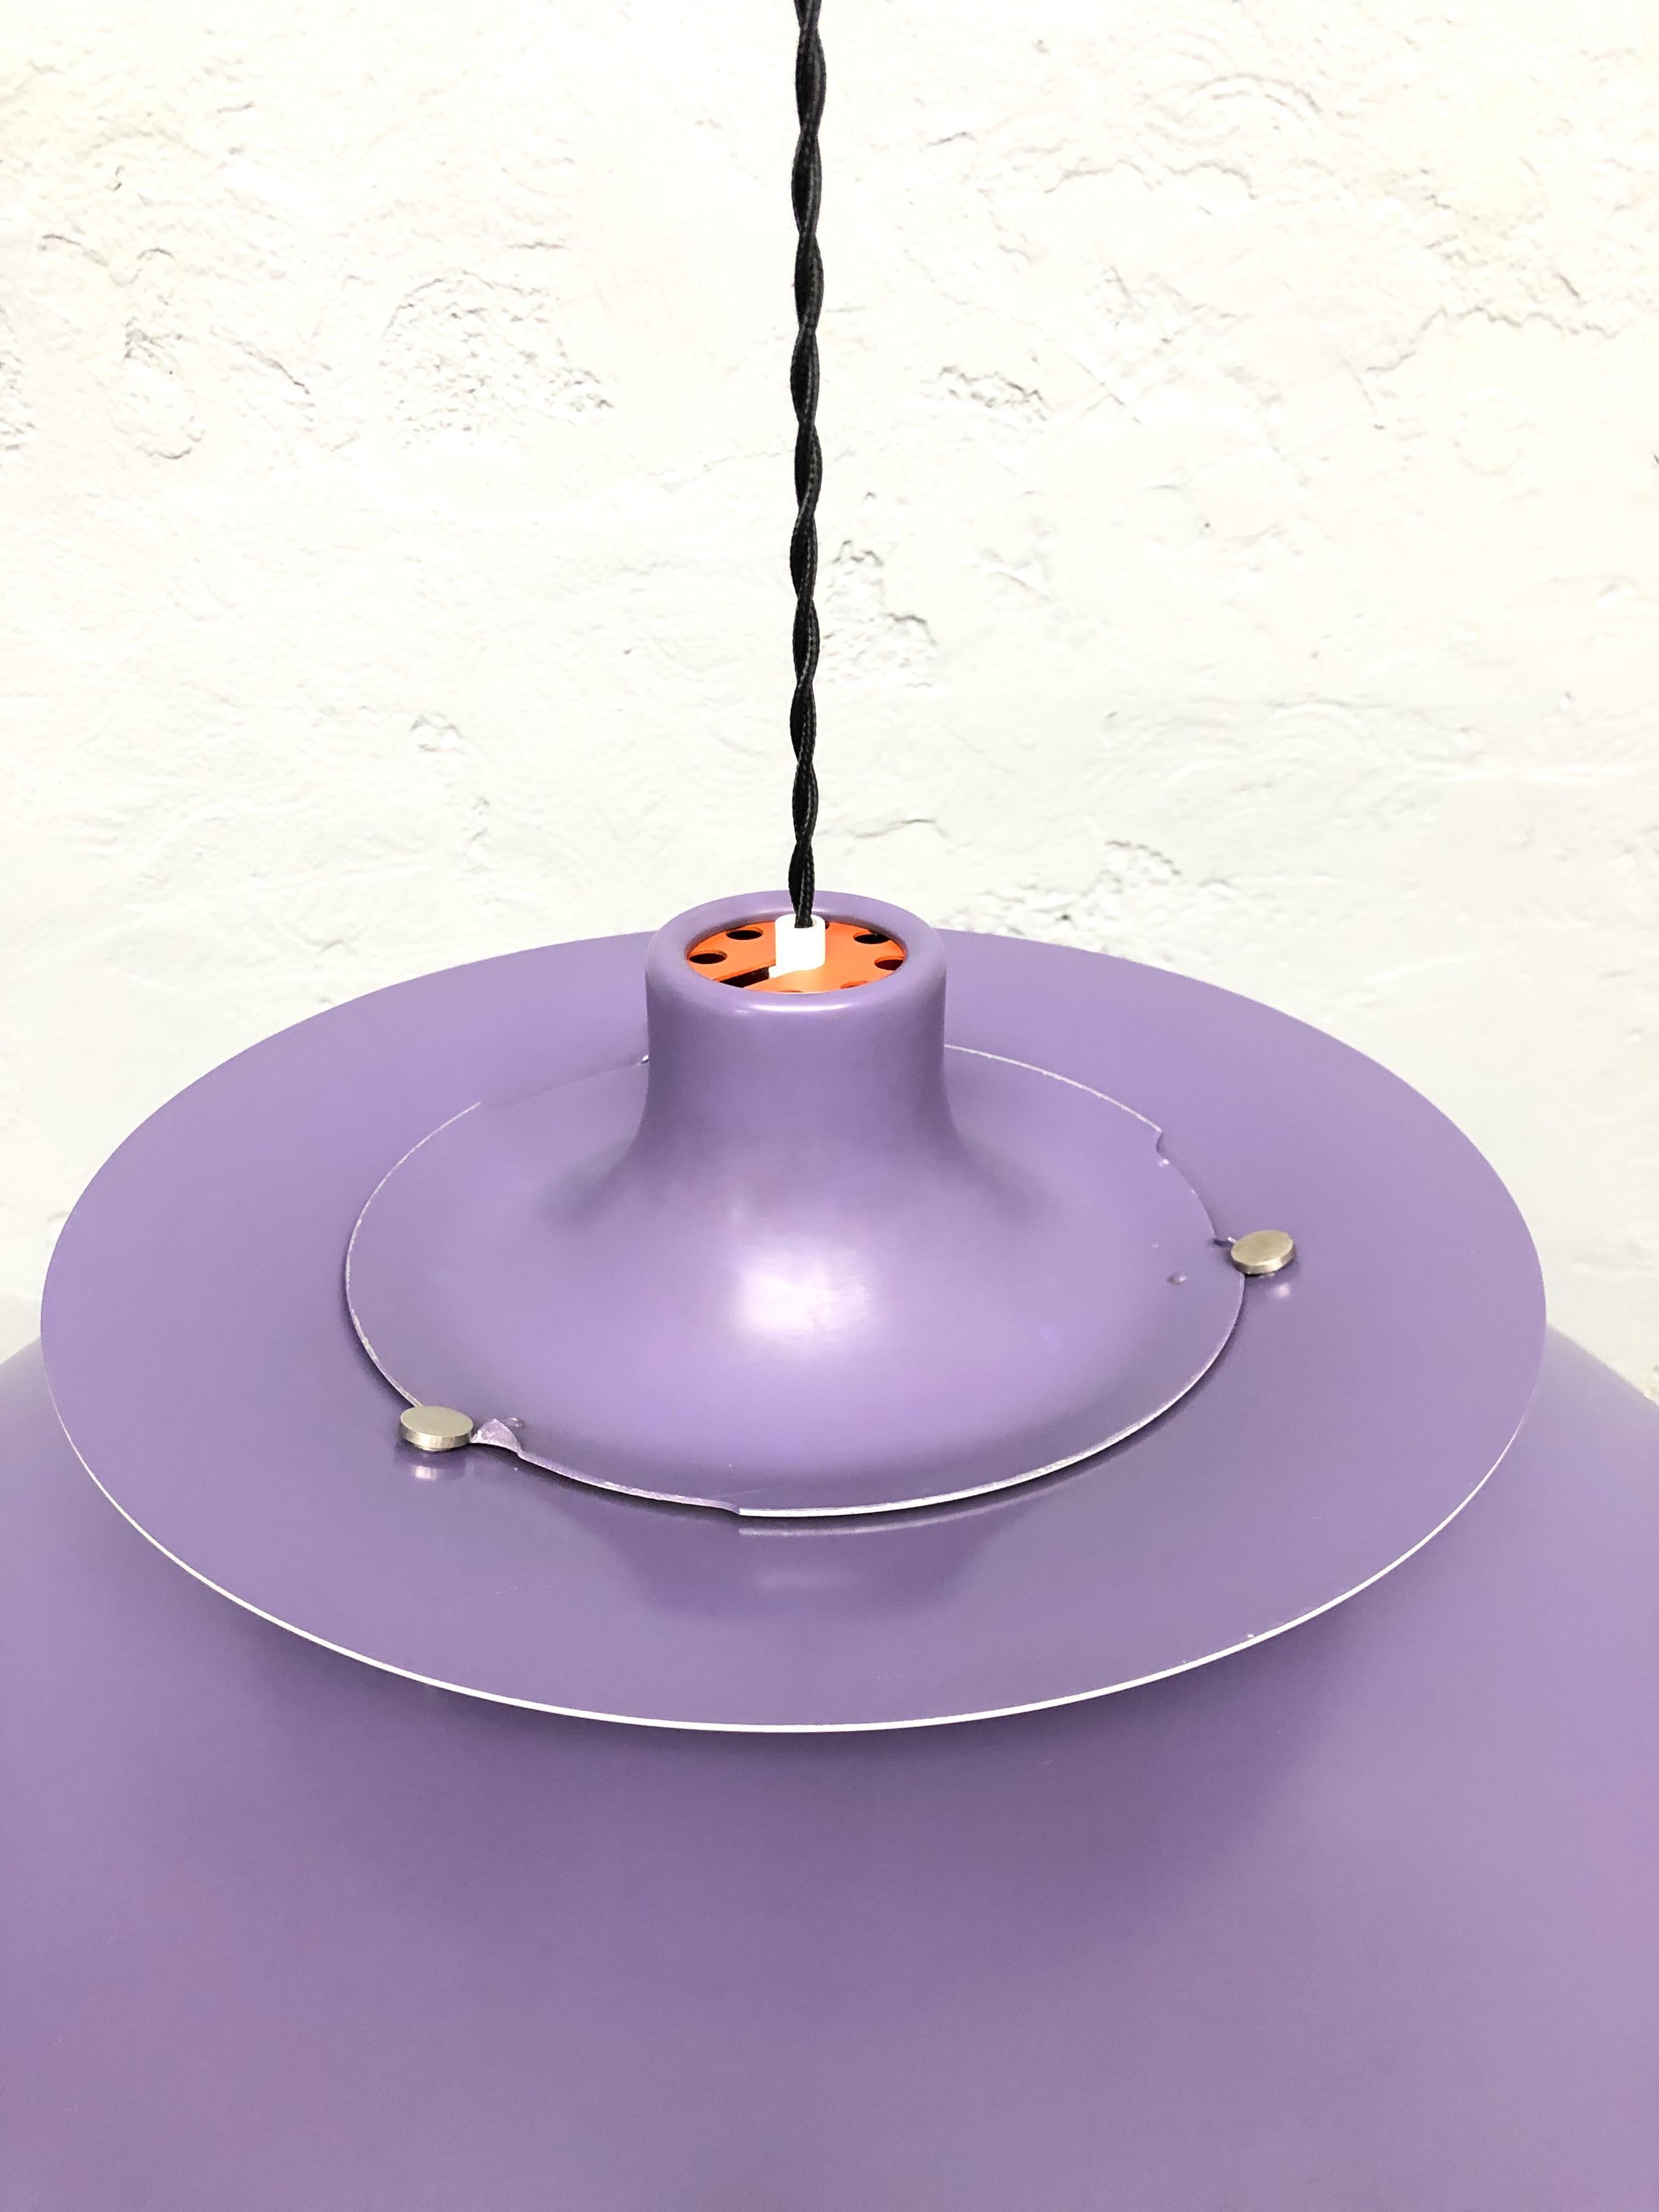 Danish Iconic Rare 1st Edition Poul Henningsen PH 5 Chandelier Pendant Lamp from 1958 For Sale